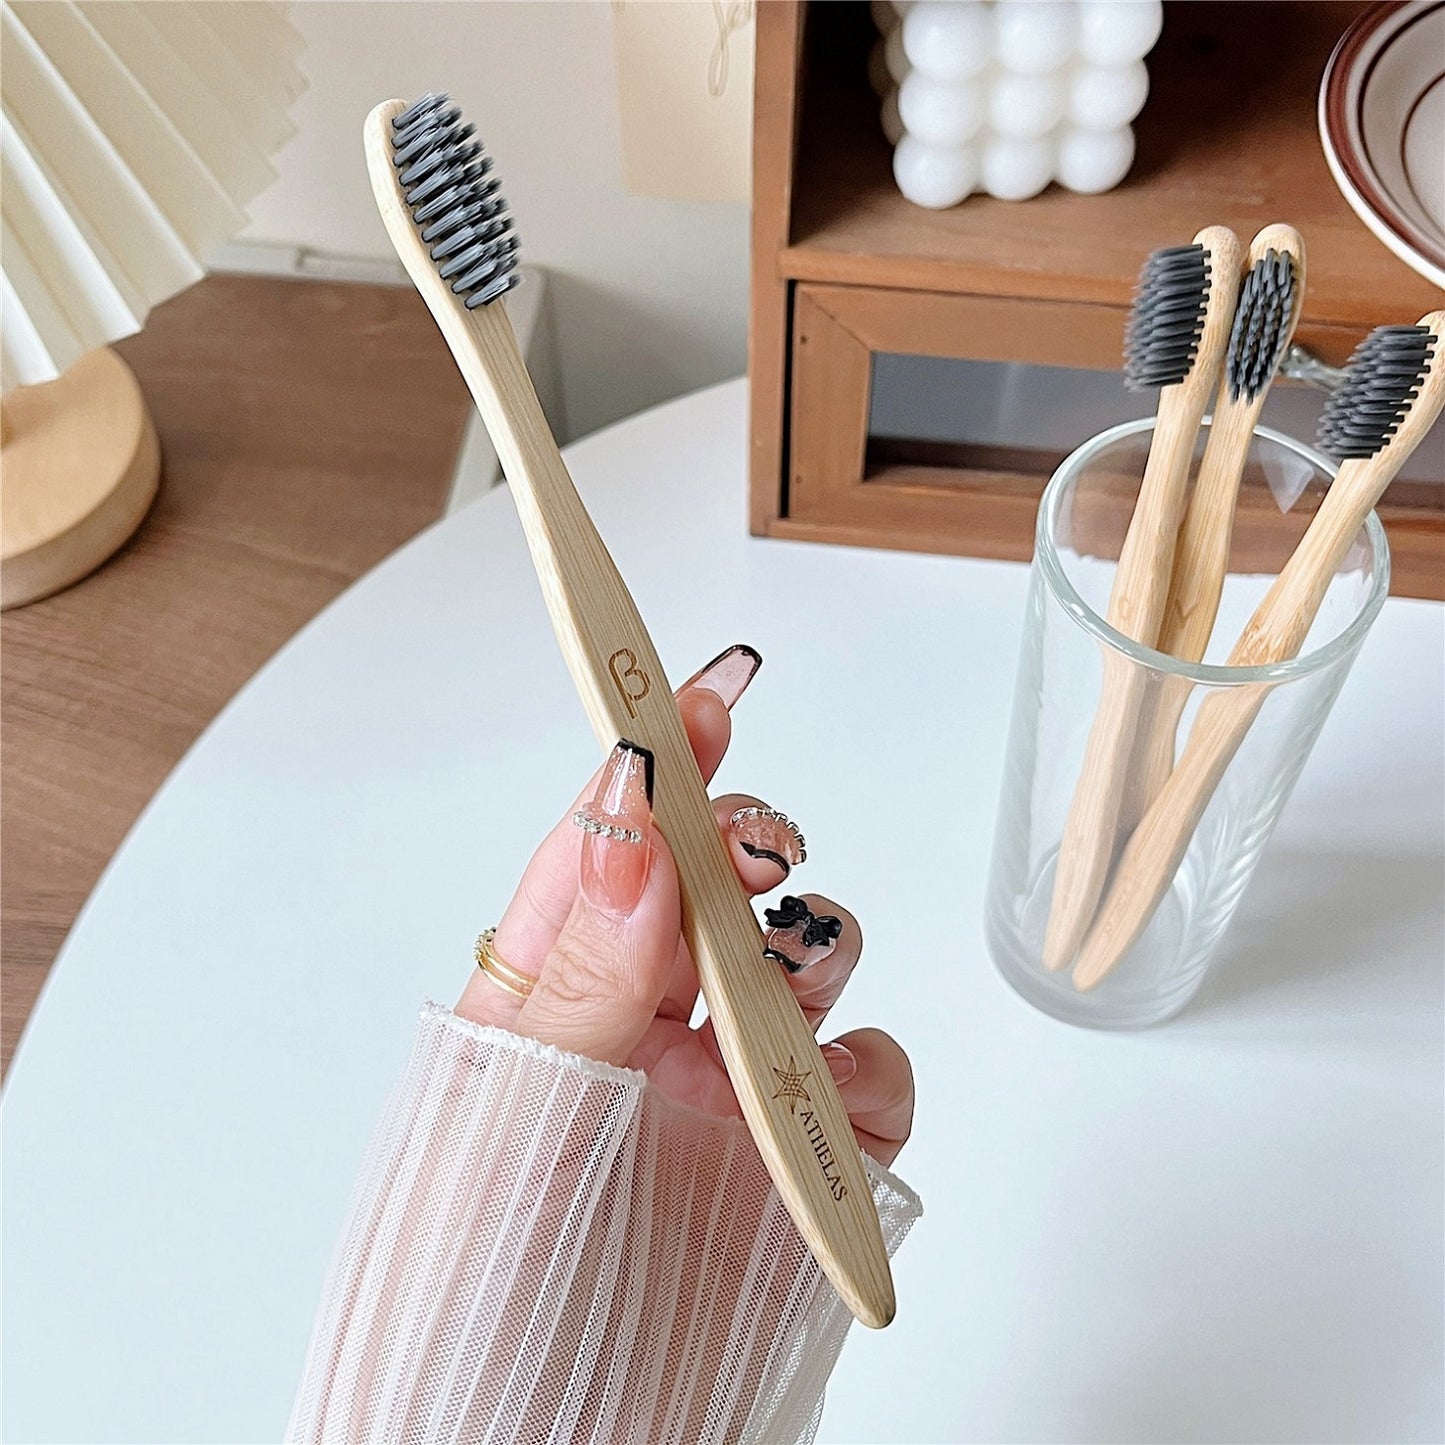 Charco Bamboo Toothbrush with Charcoal Activated Bristles (pack of 4)